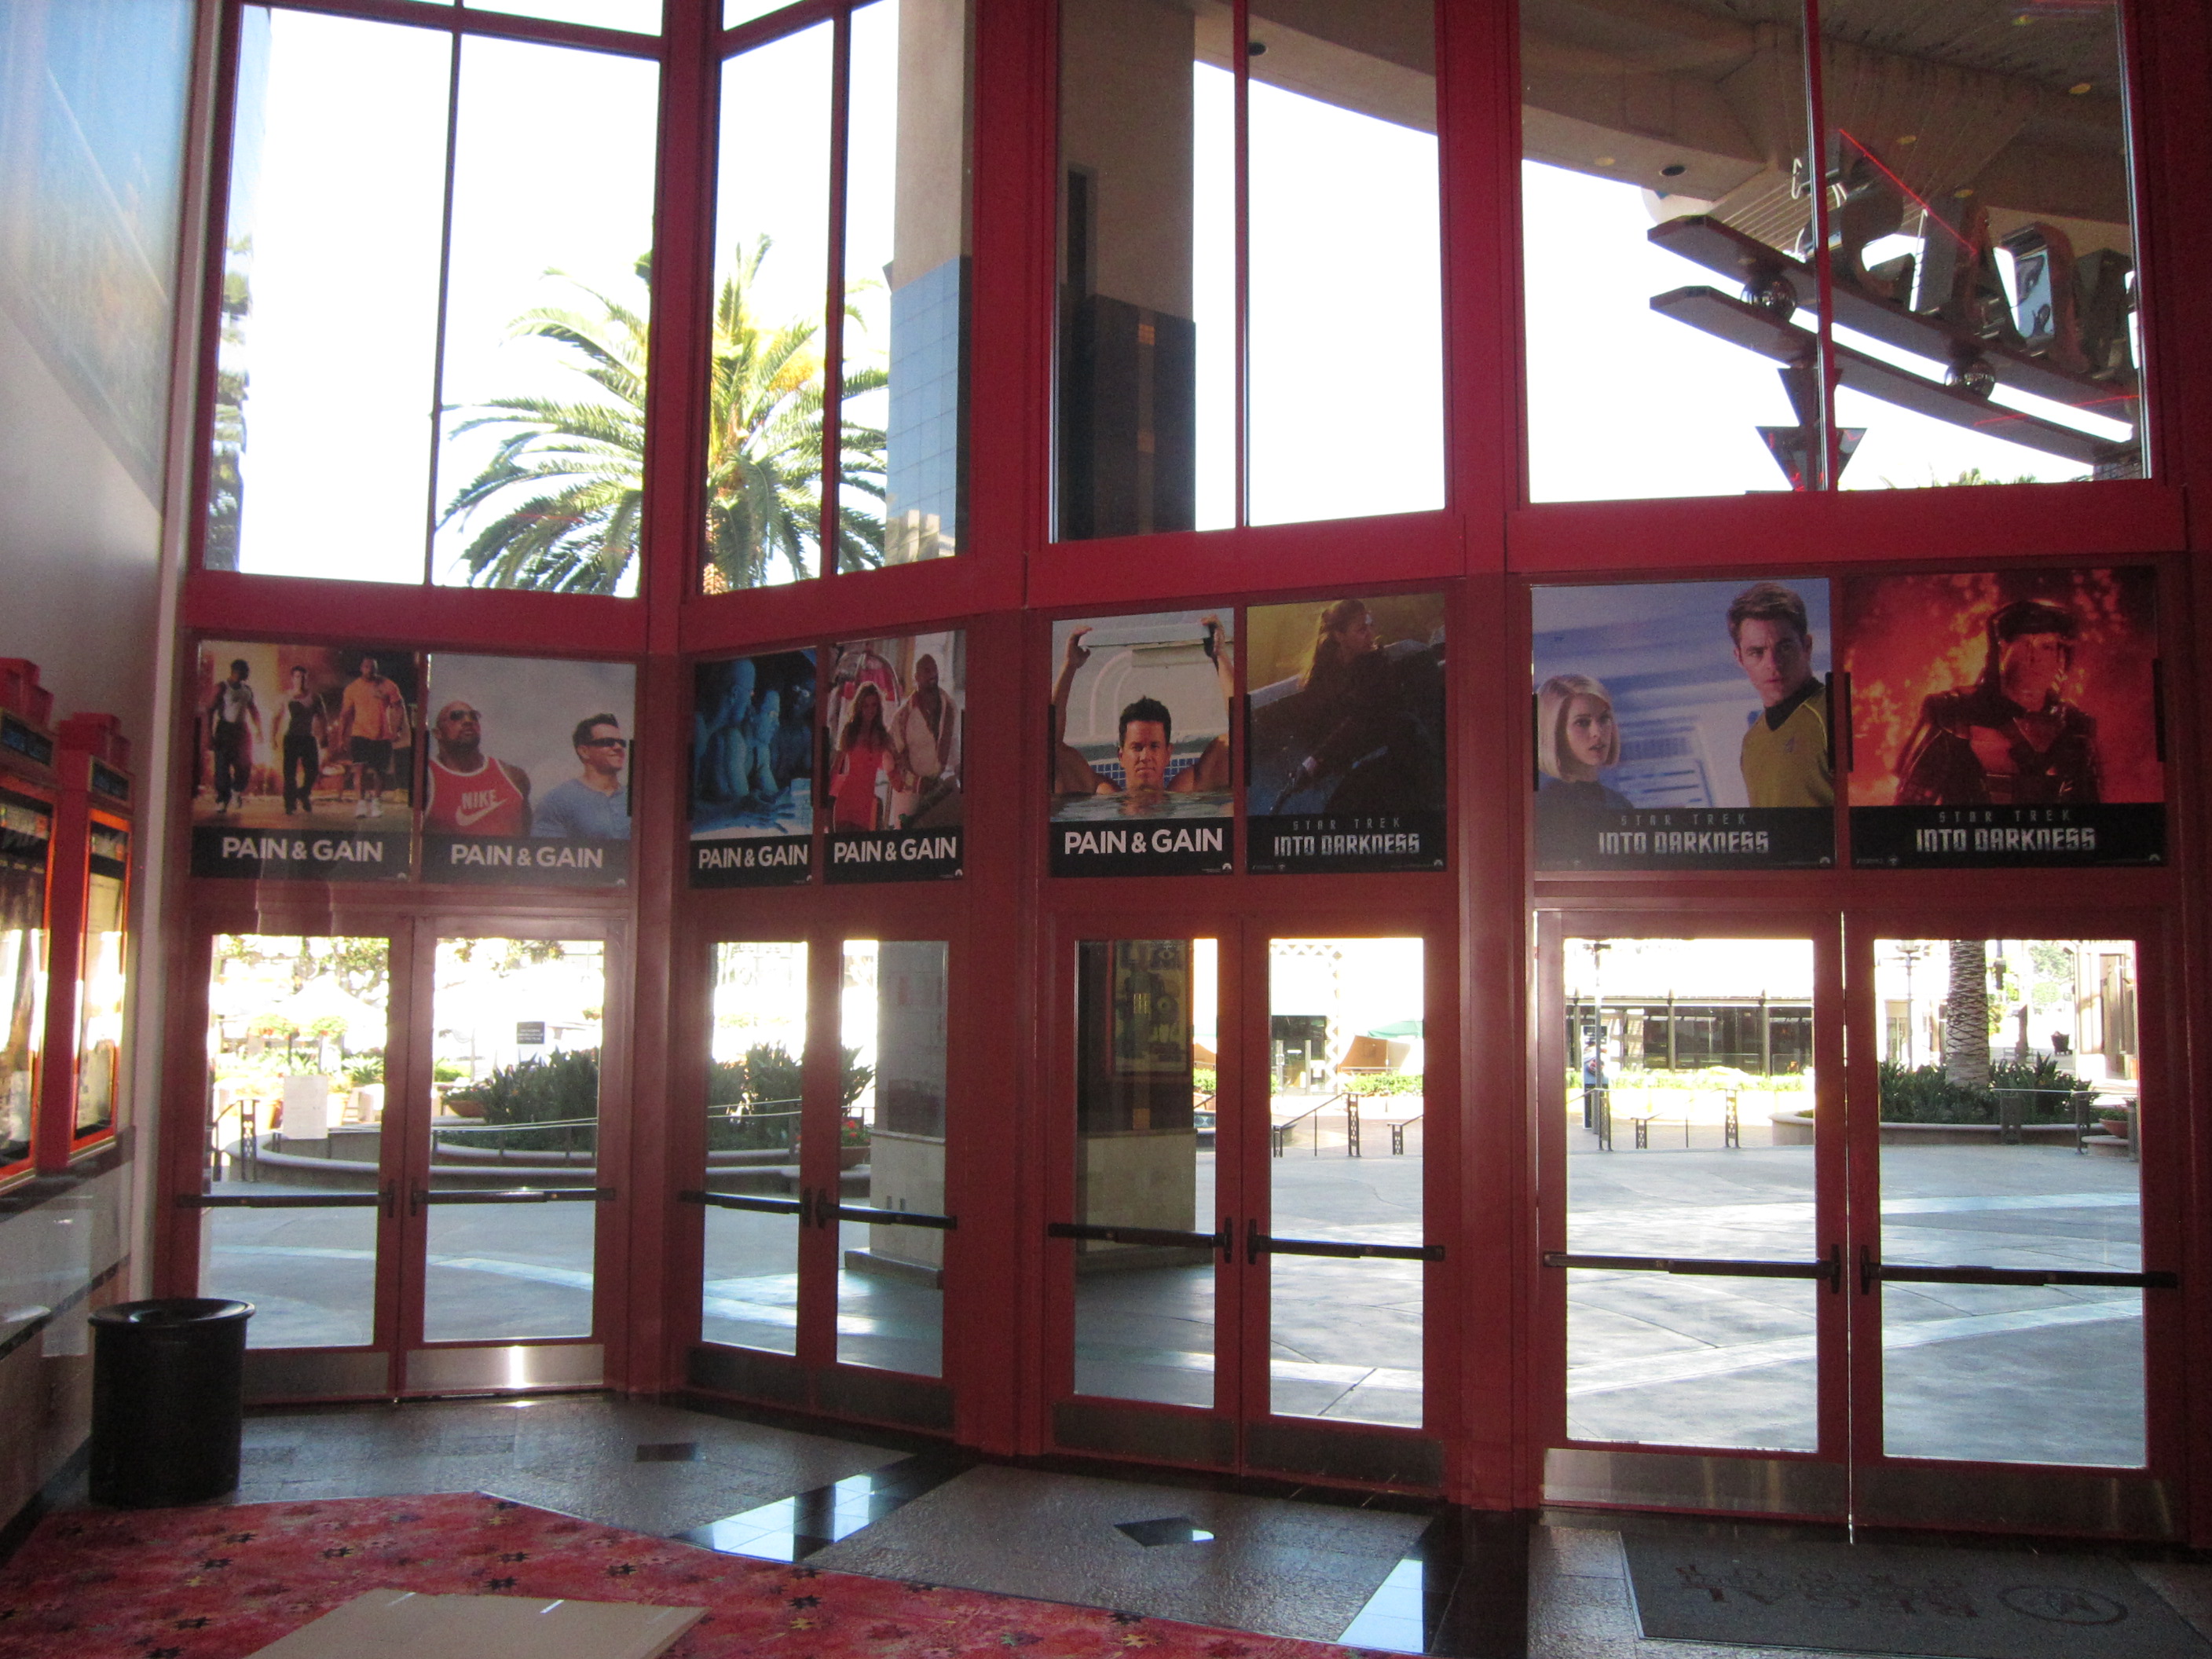 PAIN AND GAIN double sided color photo boards above the doors viewed from inside the theatre lobby.